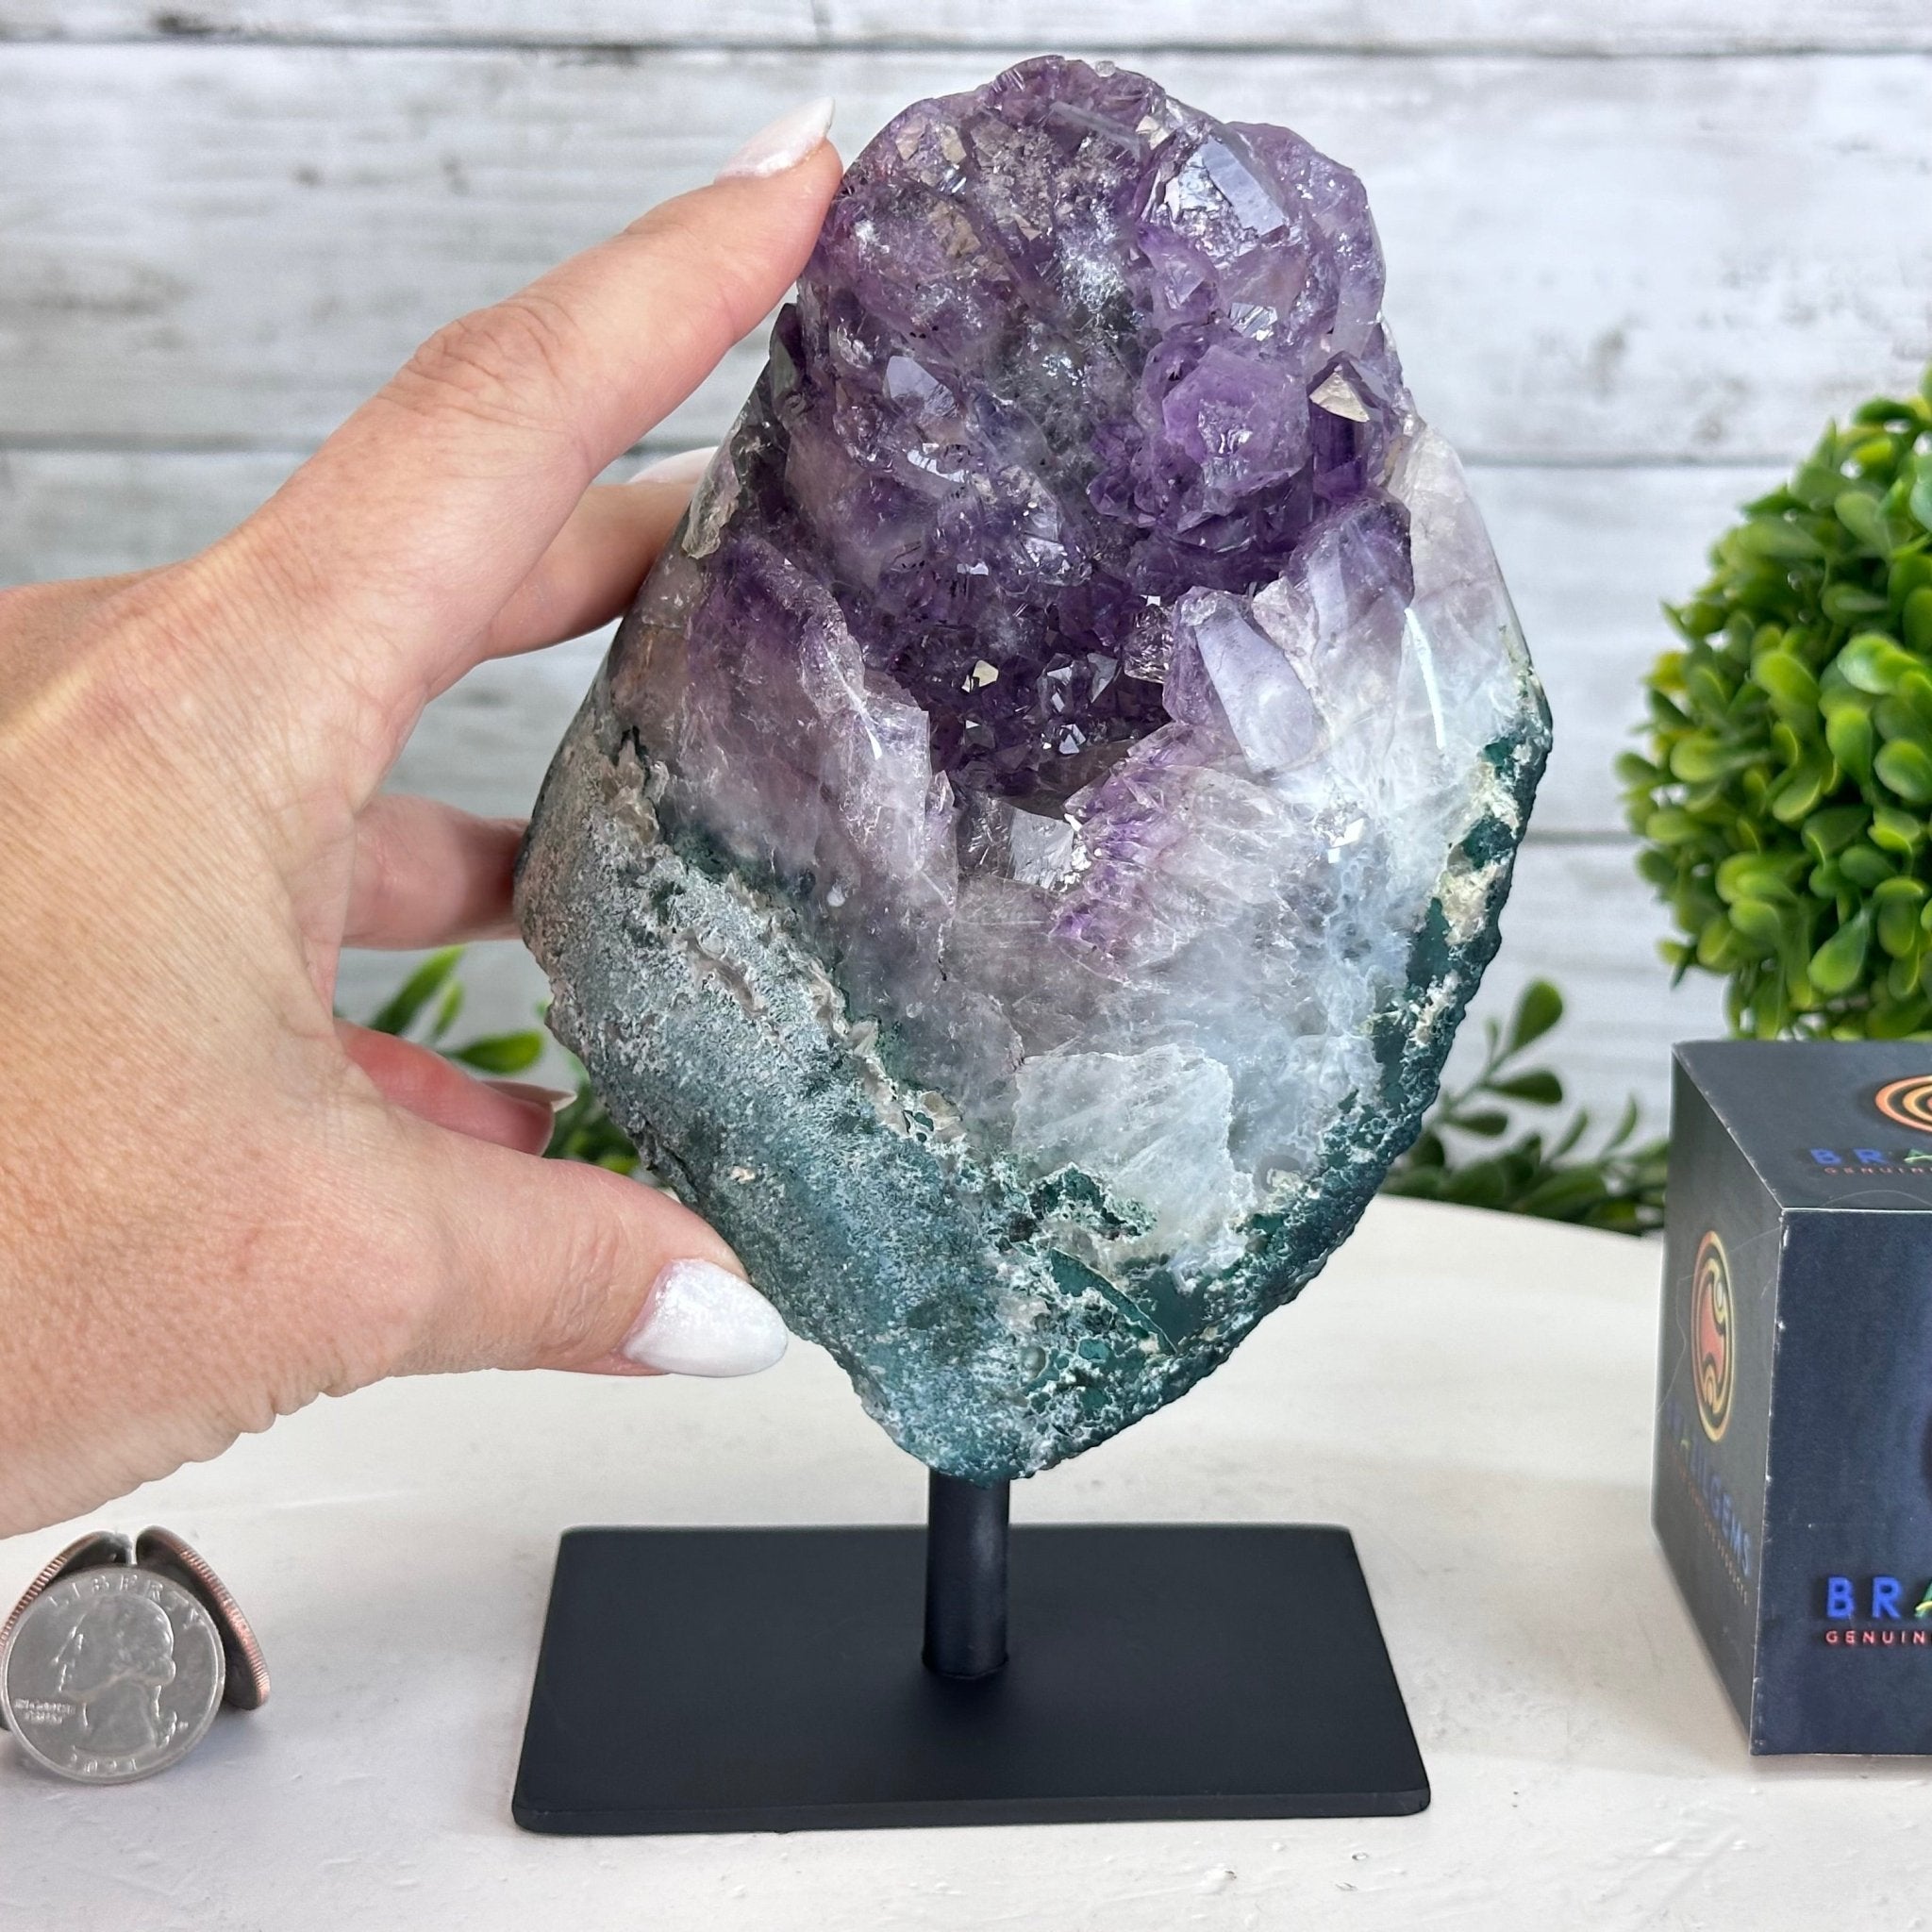 Amethyst Cluster on a Metal Base, 3.1 lbs & 7.4" Tall #5491-0167 - Brazil GemsBrazil GemsAmethyst Cluster on a Metal Base, 3.1 lbs & 7.4" Tall #5491-0167Clusters on Fixed Bases5491-0167